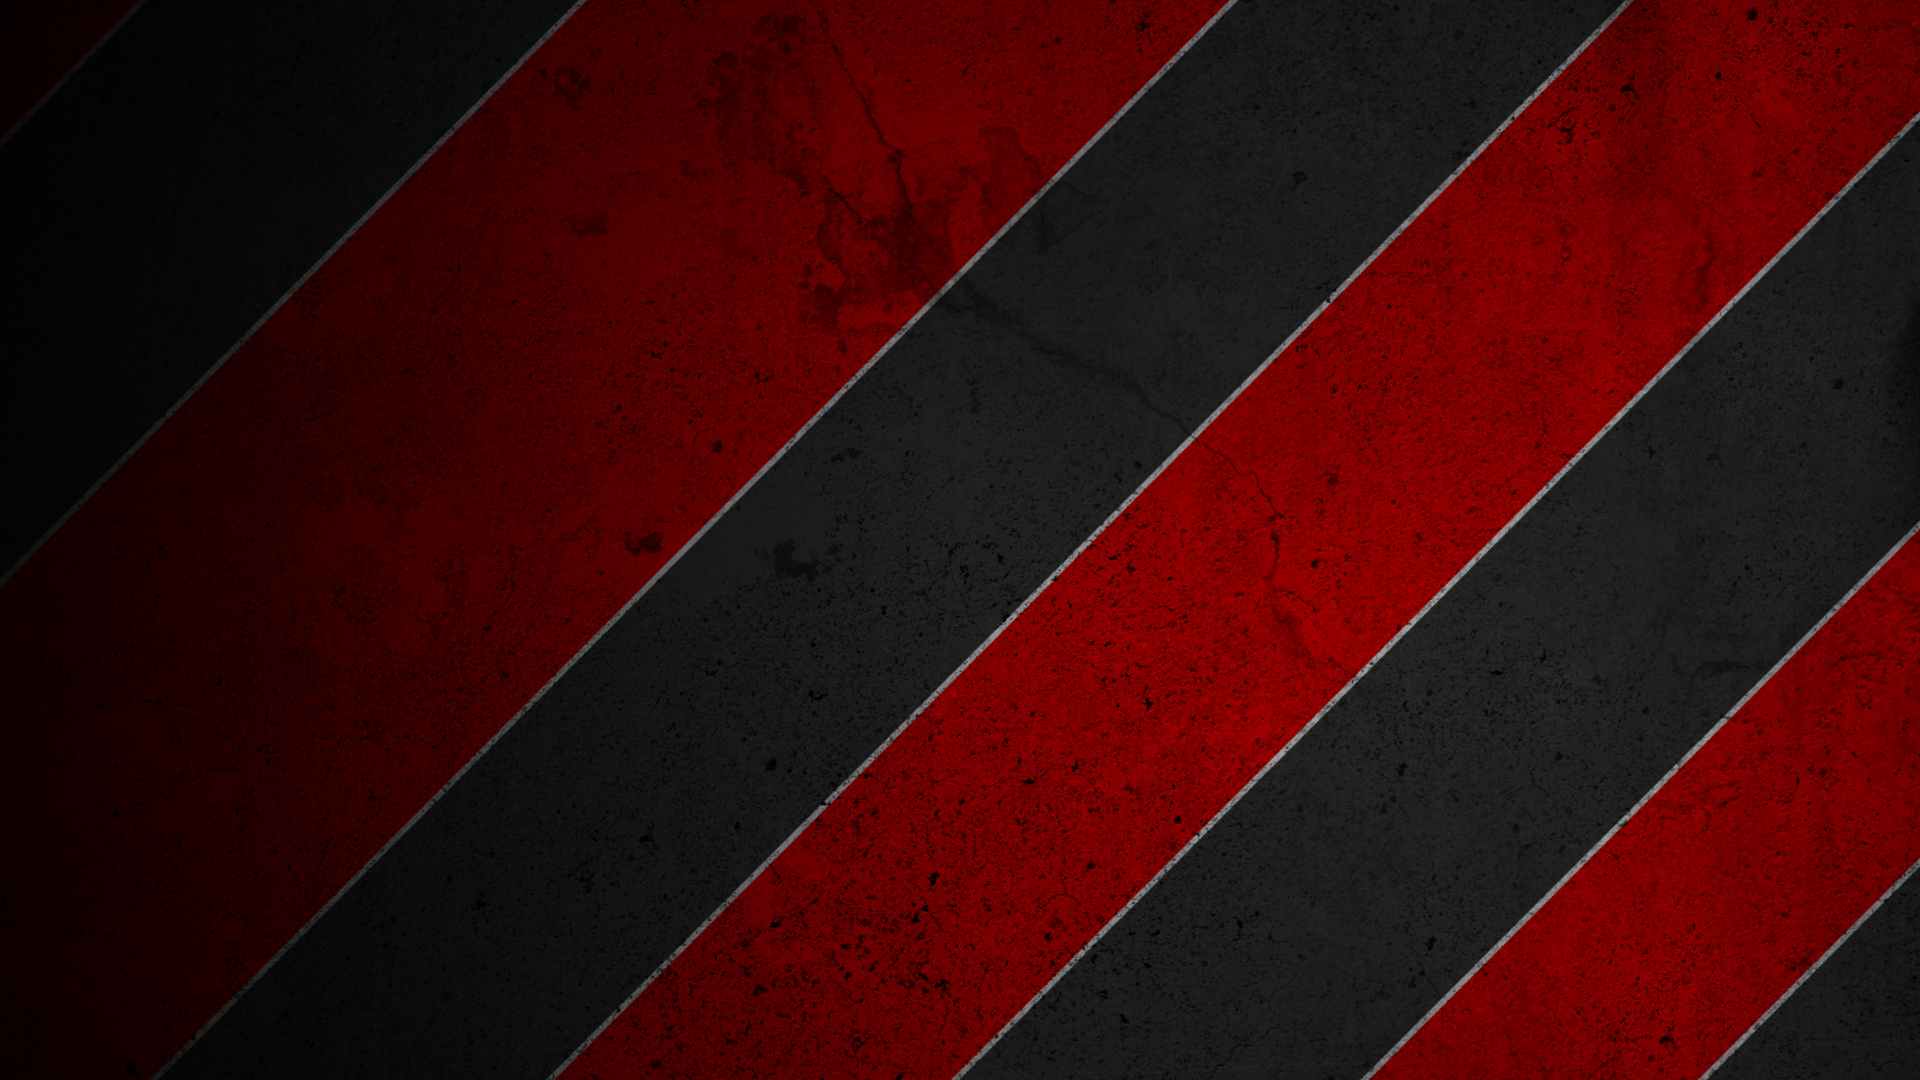 Red And Black Wallpaper 6 227529 High Definition Wallpapers wallalay